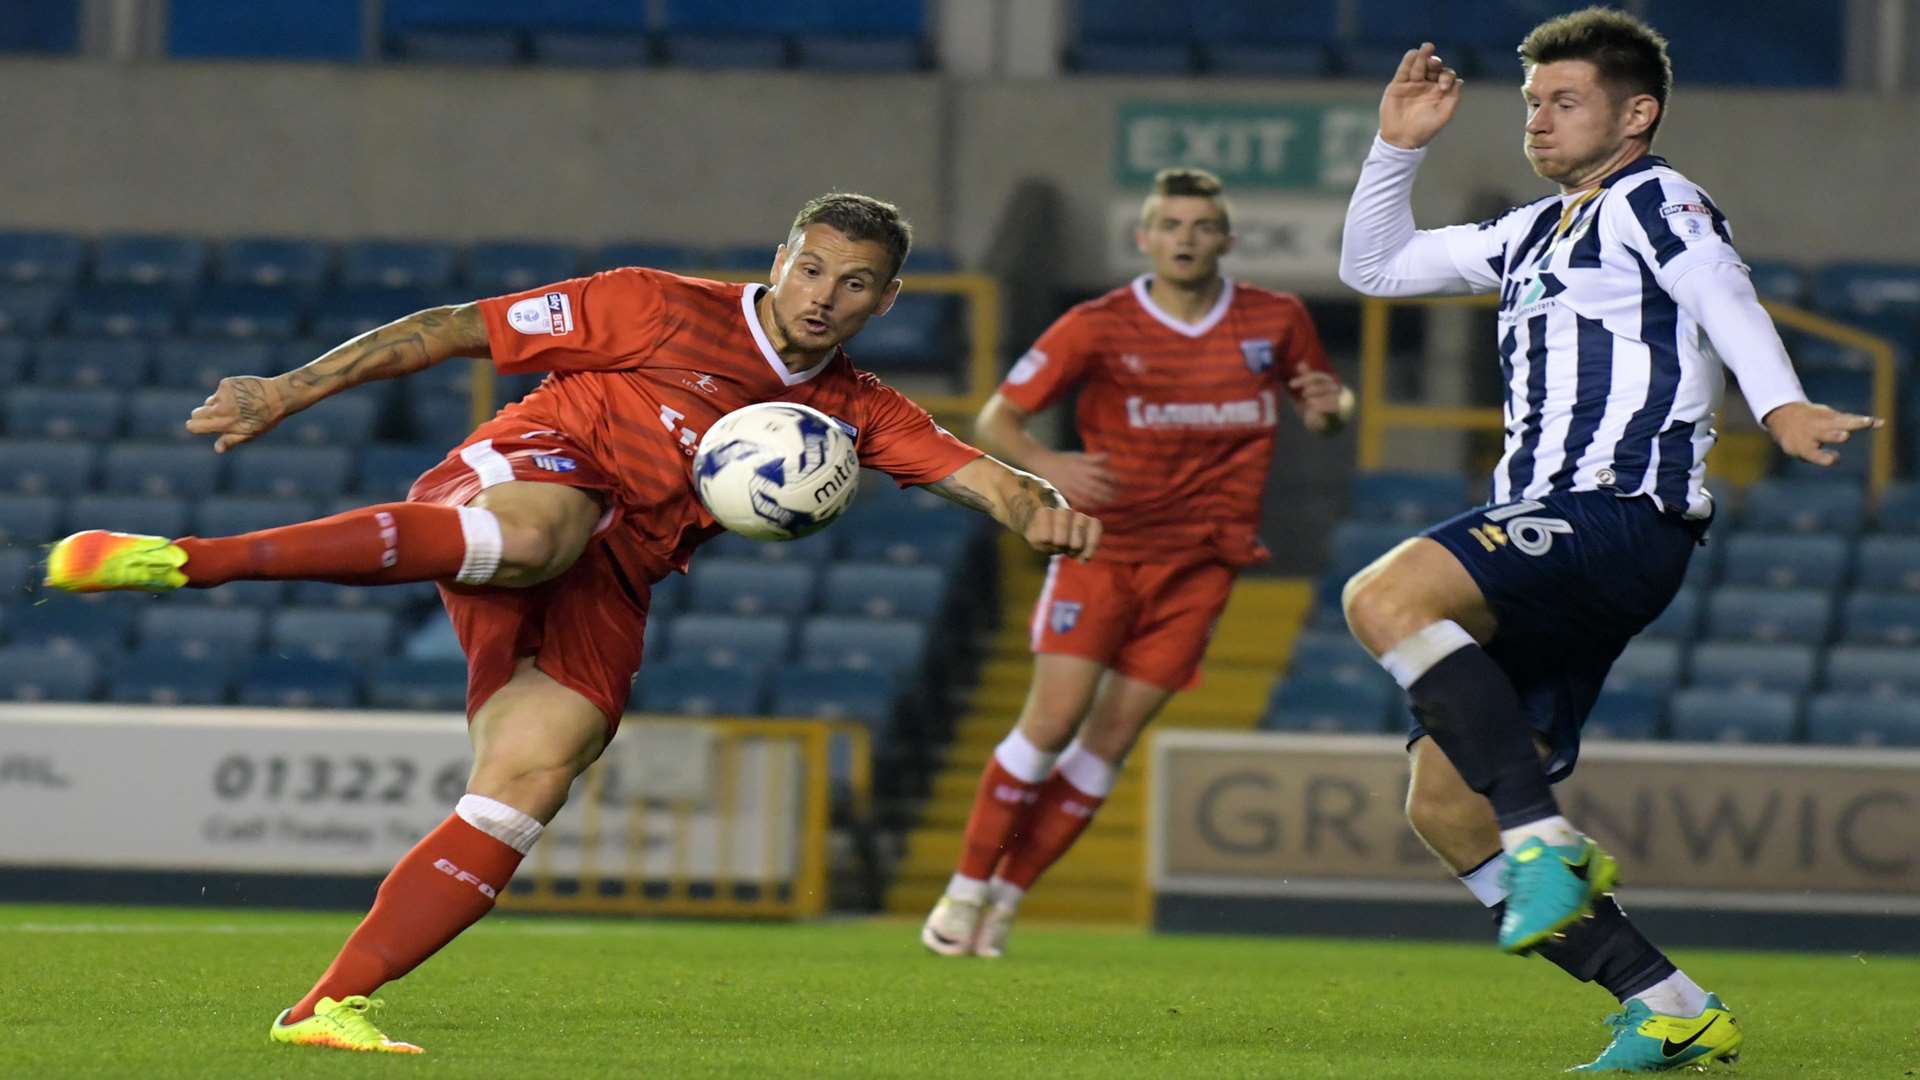 Chris Herd goes for goal at Millwall Picture: Barry Goodwin